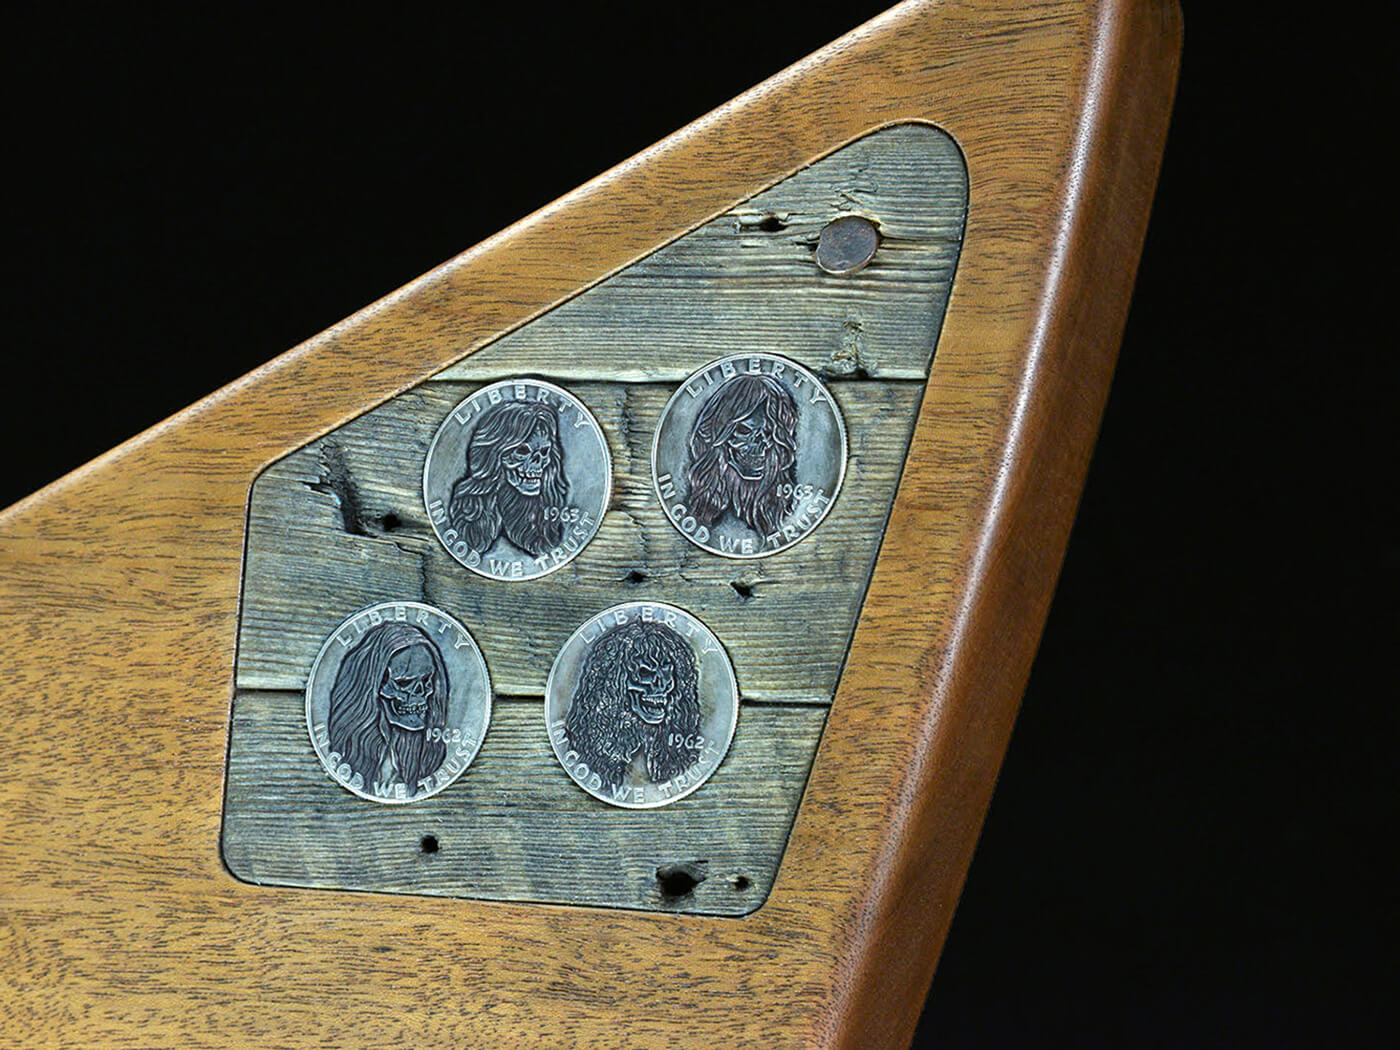 Ben Franklin silver half-dollar coins inlaid into a panel of the Garage wood, each engraved with skull characters of James, Lars, Kirk, and Cliff, and from each member’s birth year, photo by Ken Lawrence